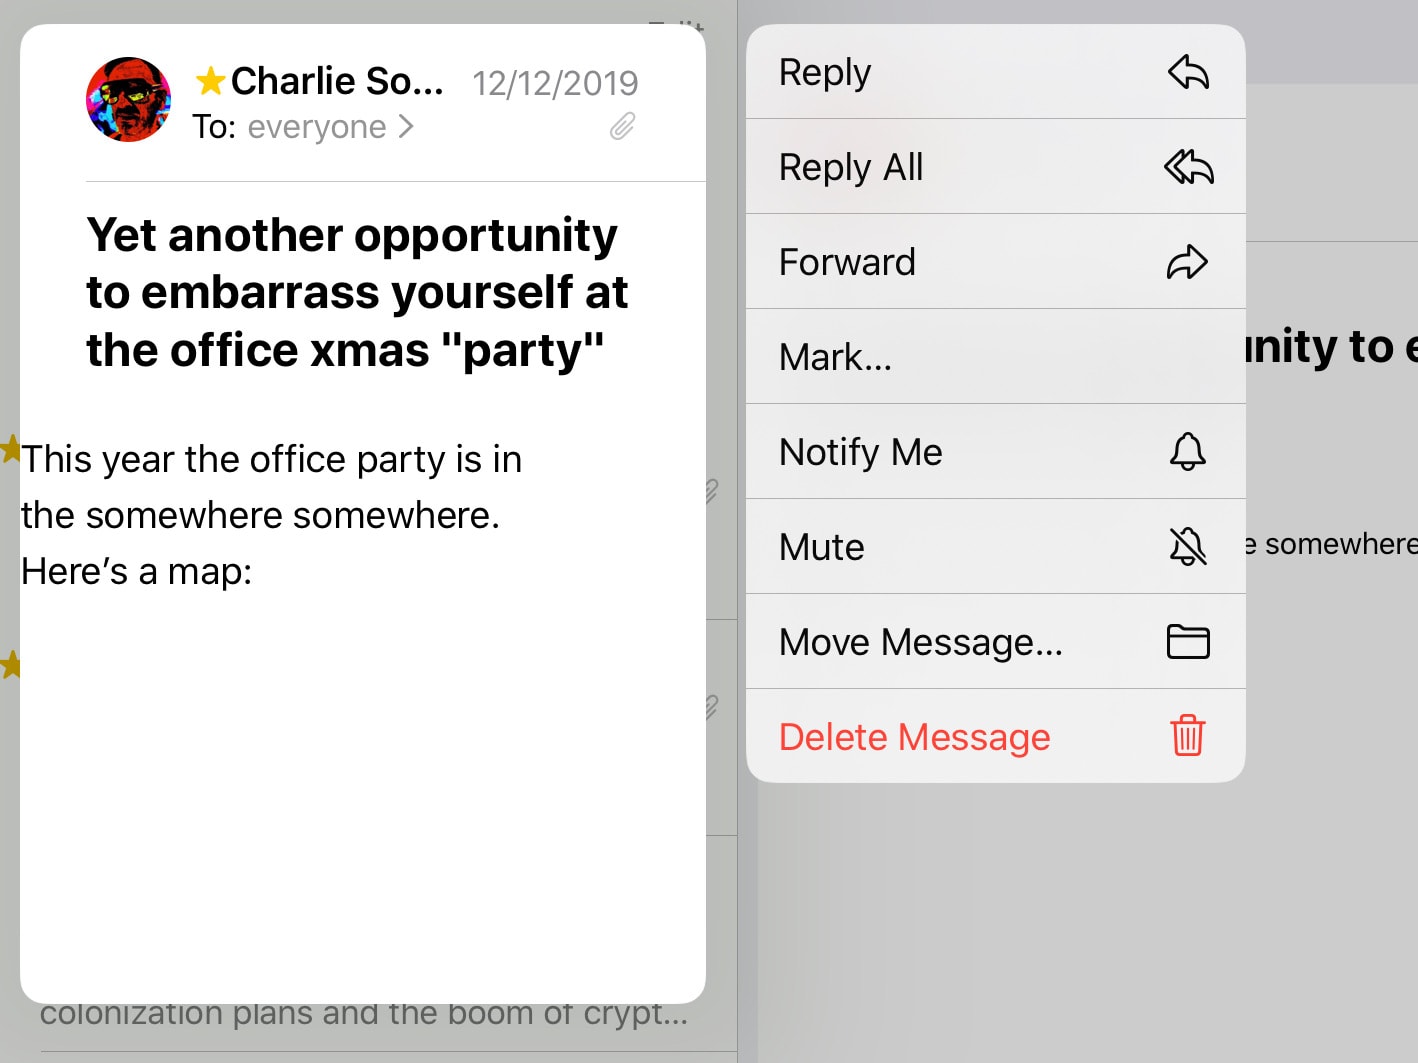 On the iPad, use the contextual menu to mark mail as spam. 